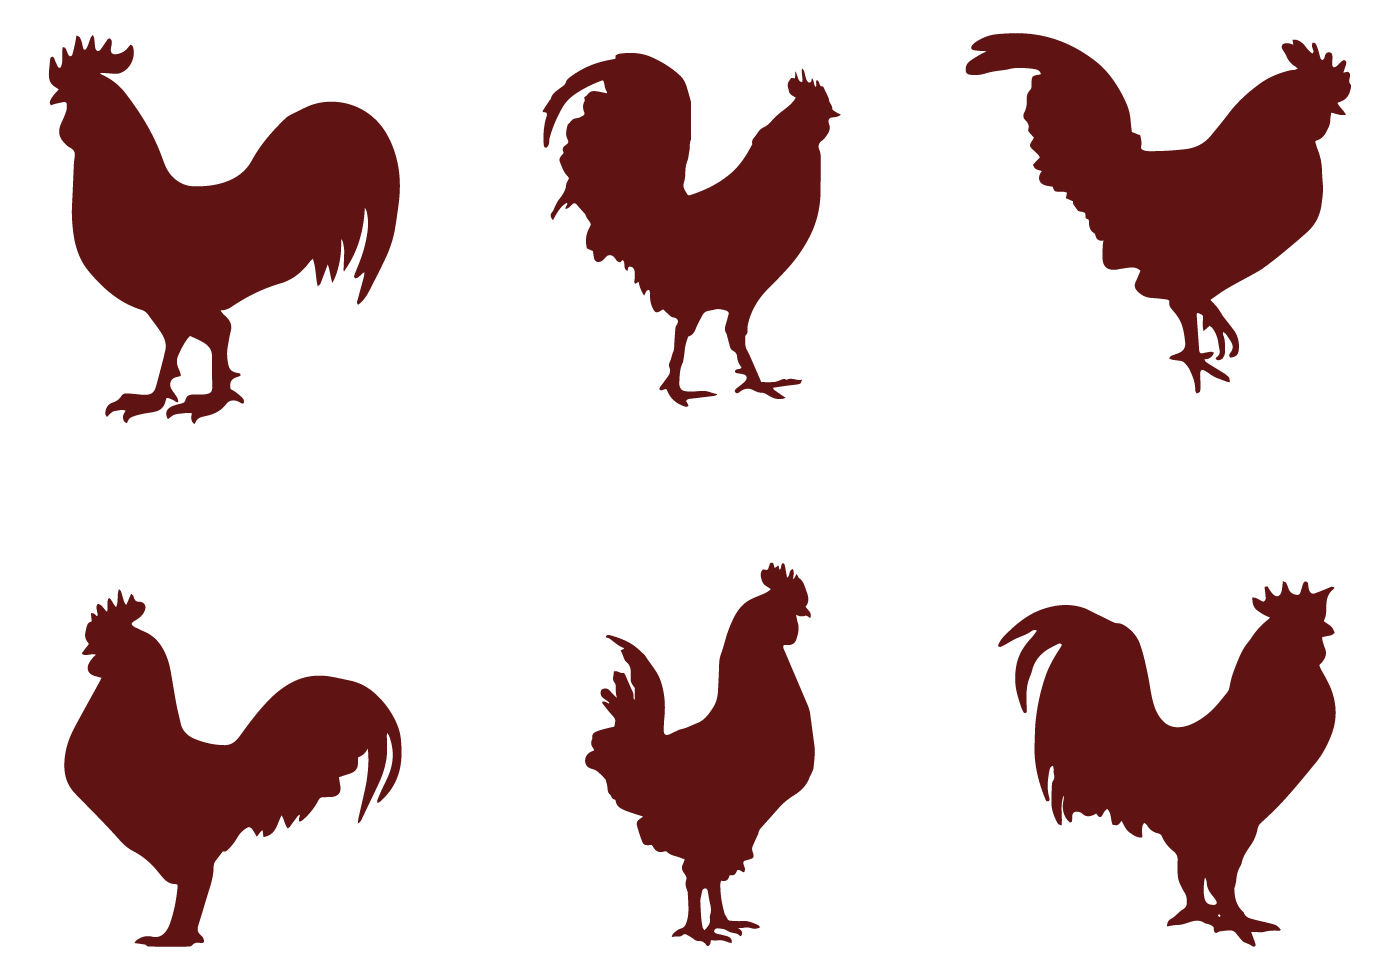 Download Rooster Silhouette Vectors for free.